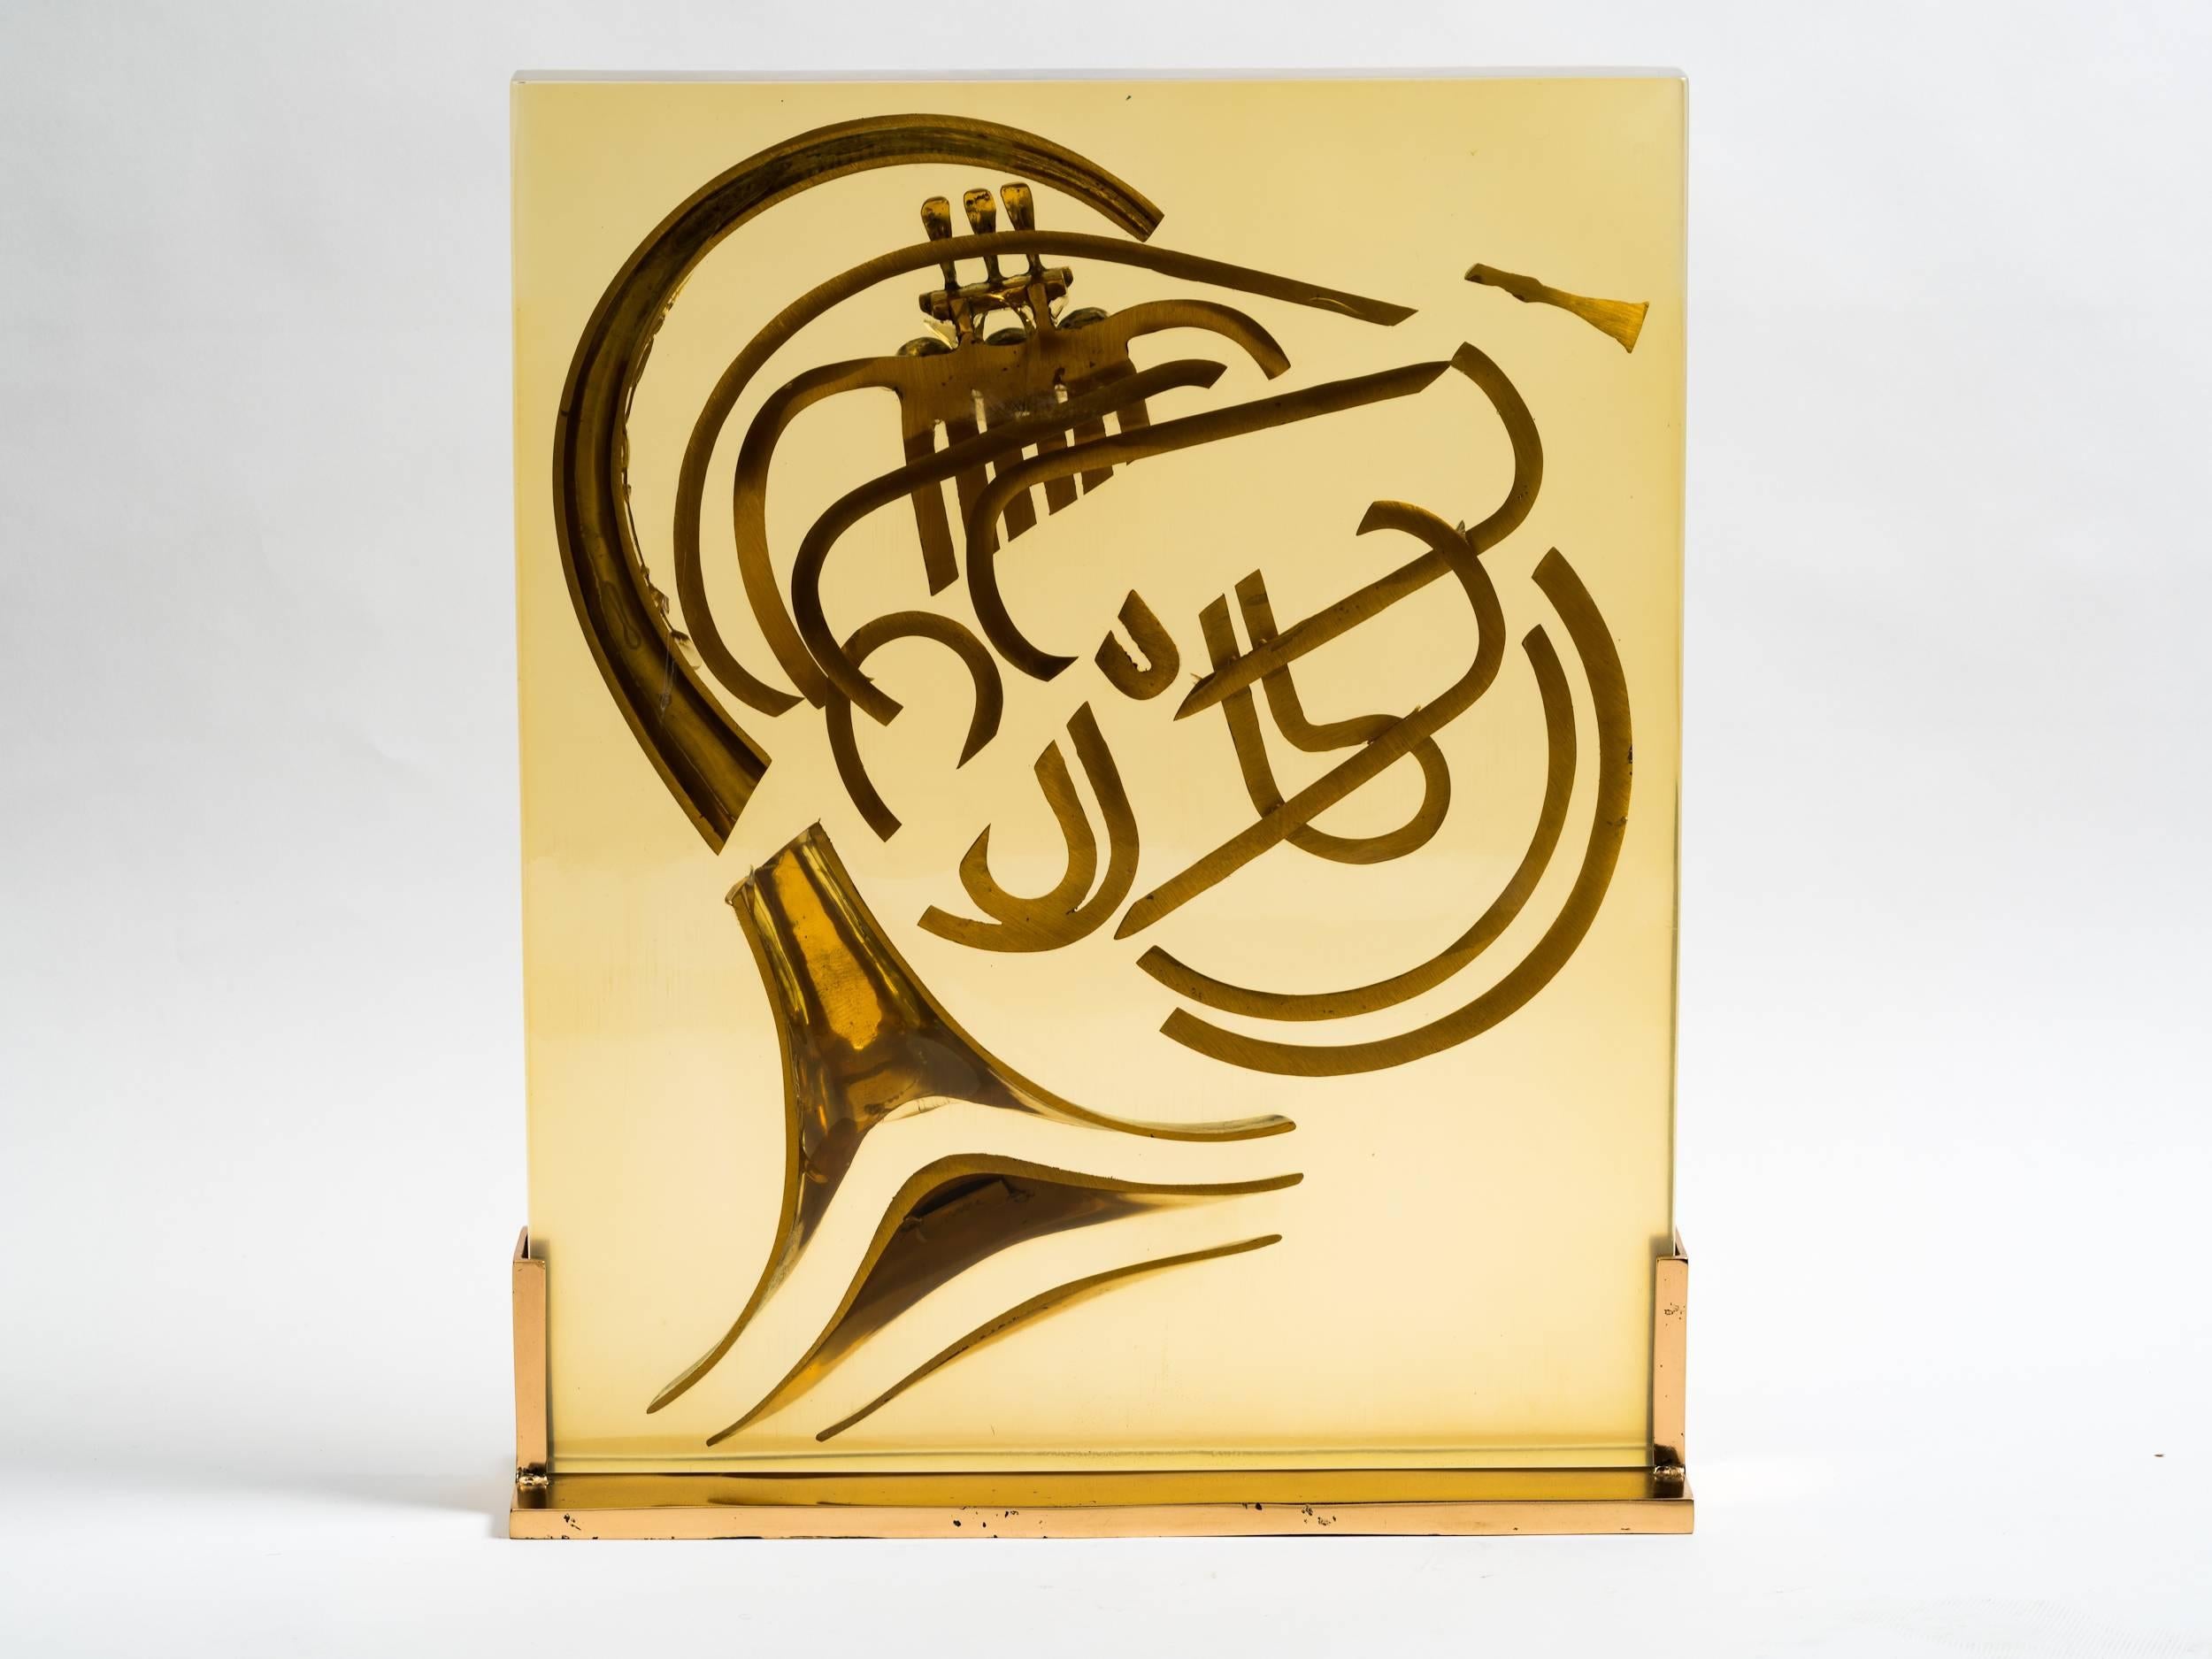 French Horn in Resin Sculpture by Arman  1